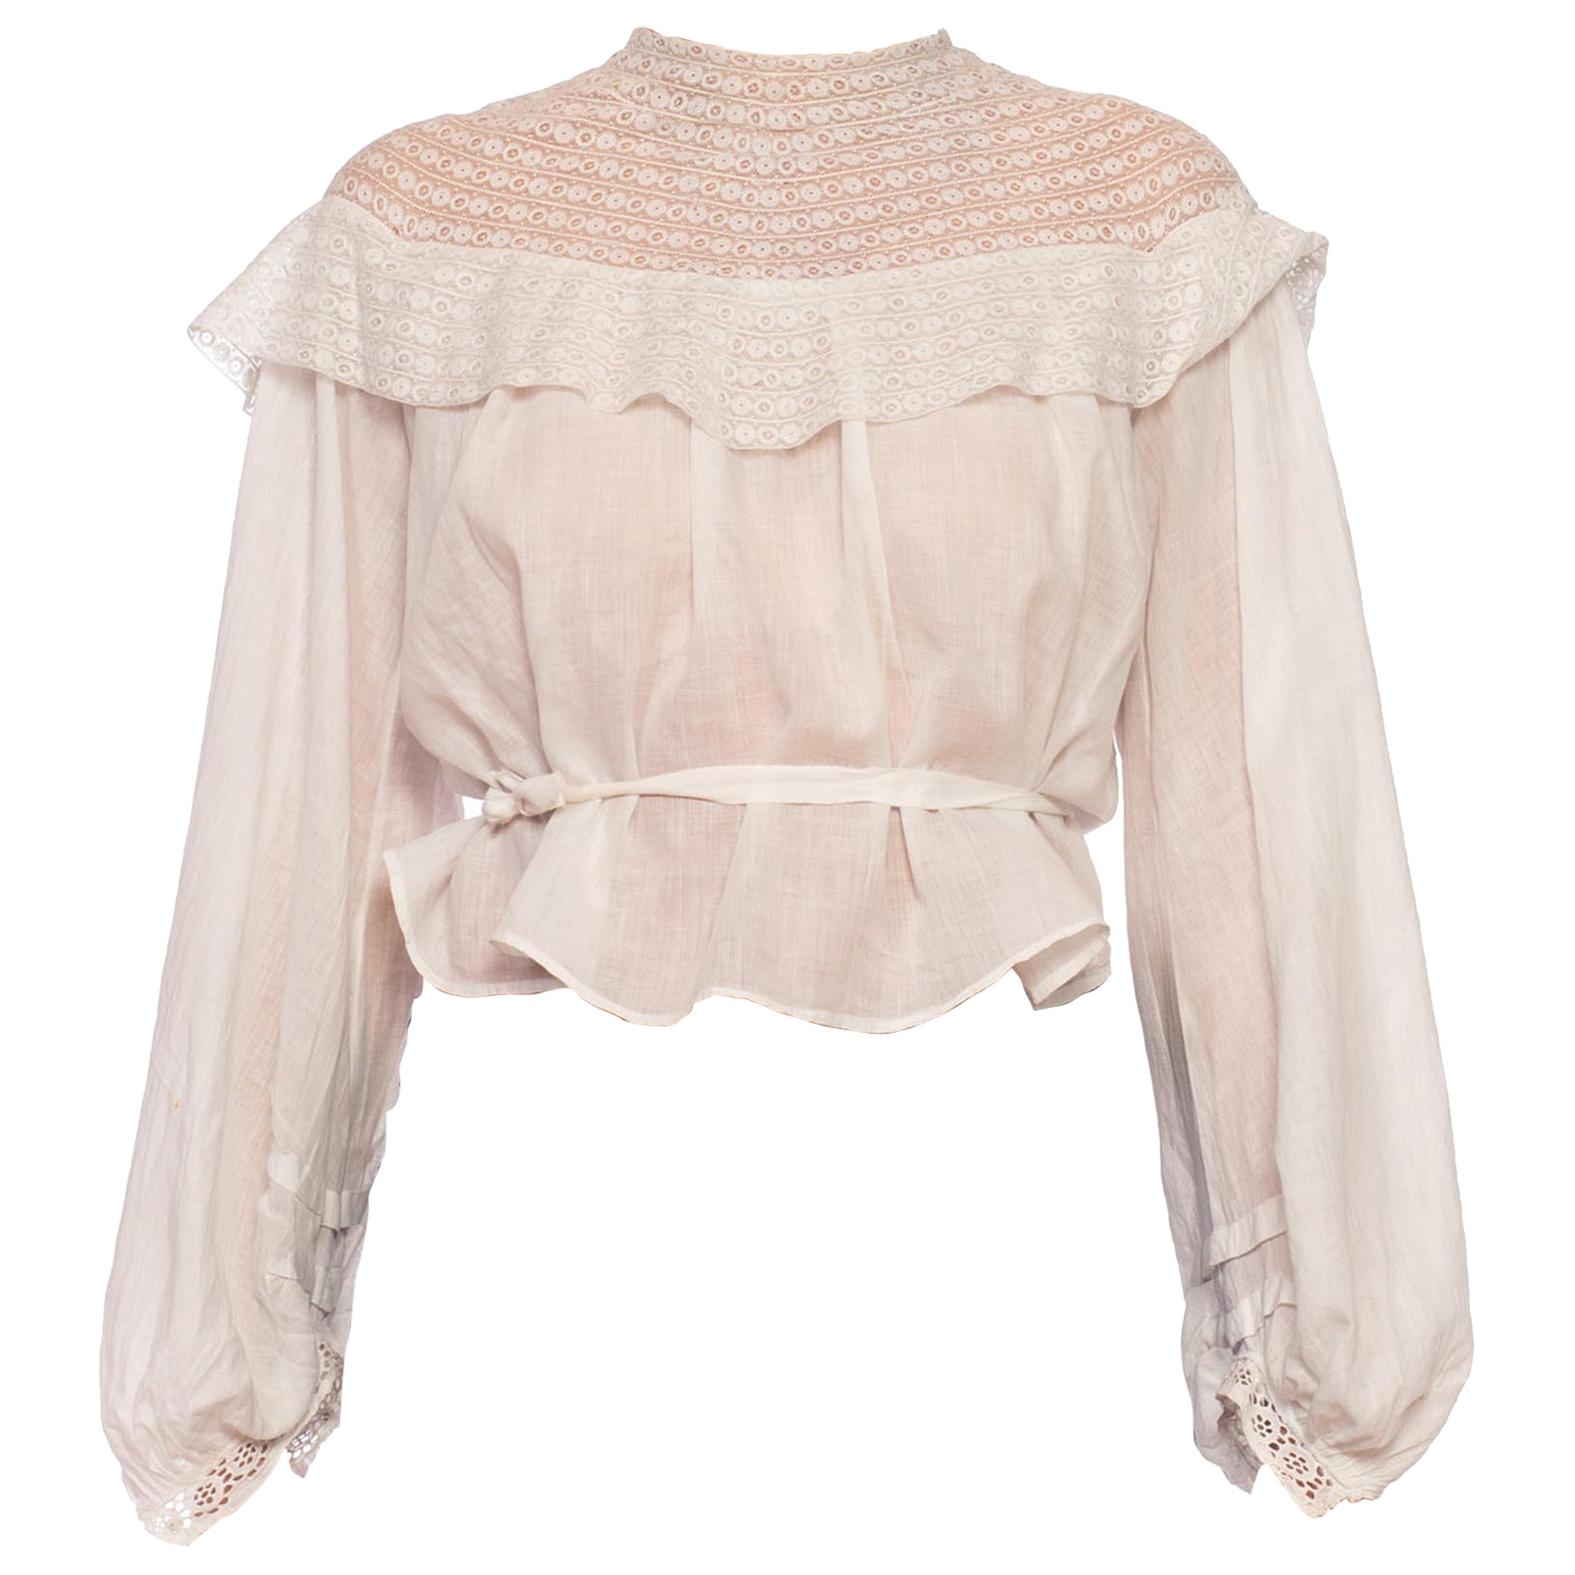 White Cotton Voile and Tape Lace Swan Neck Blouse With Bishop Sleeves ...